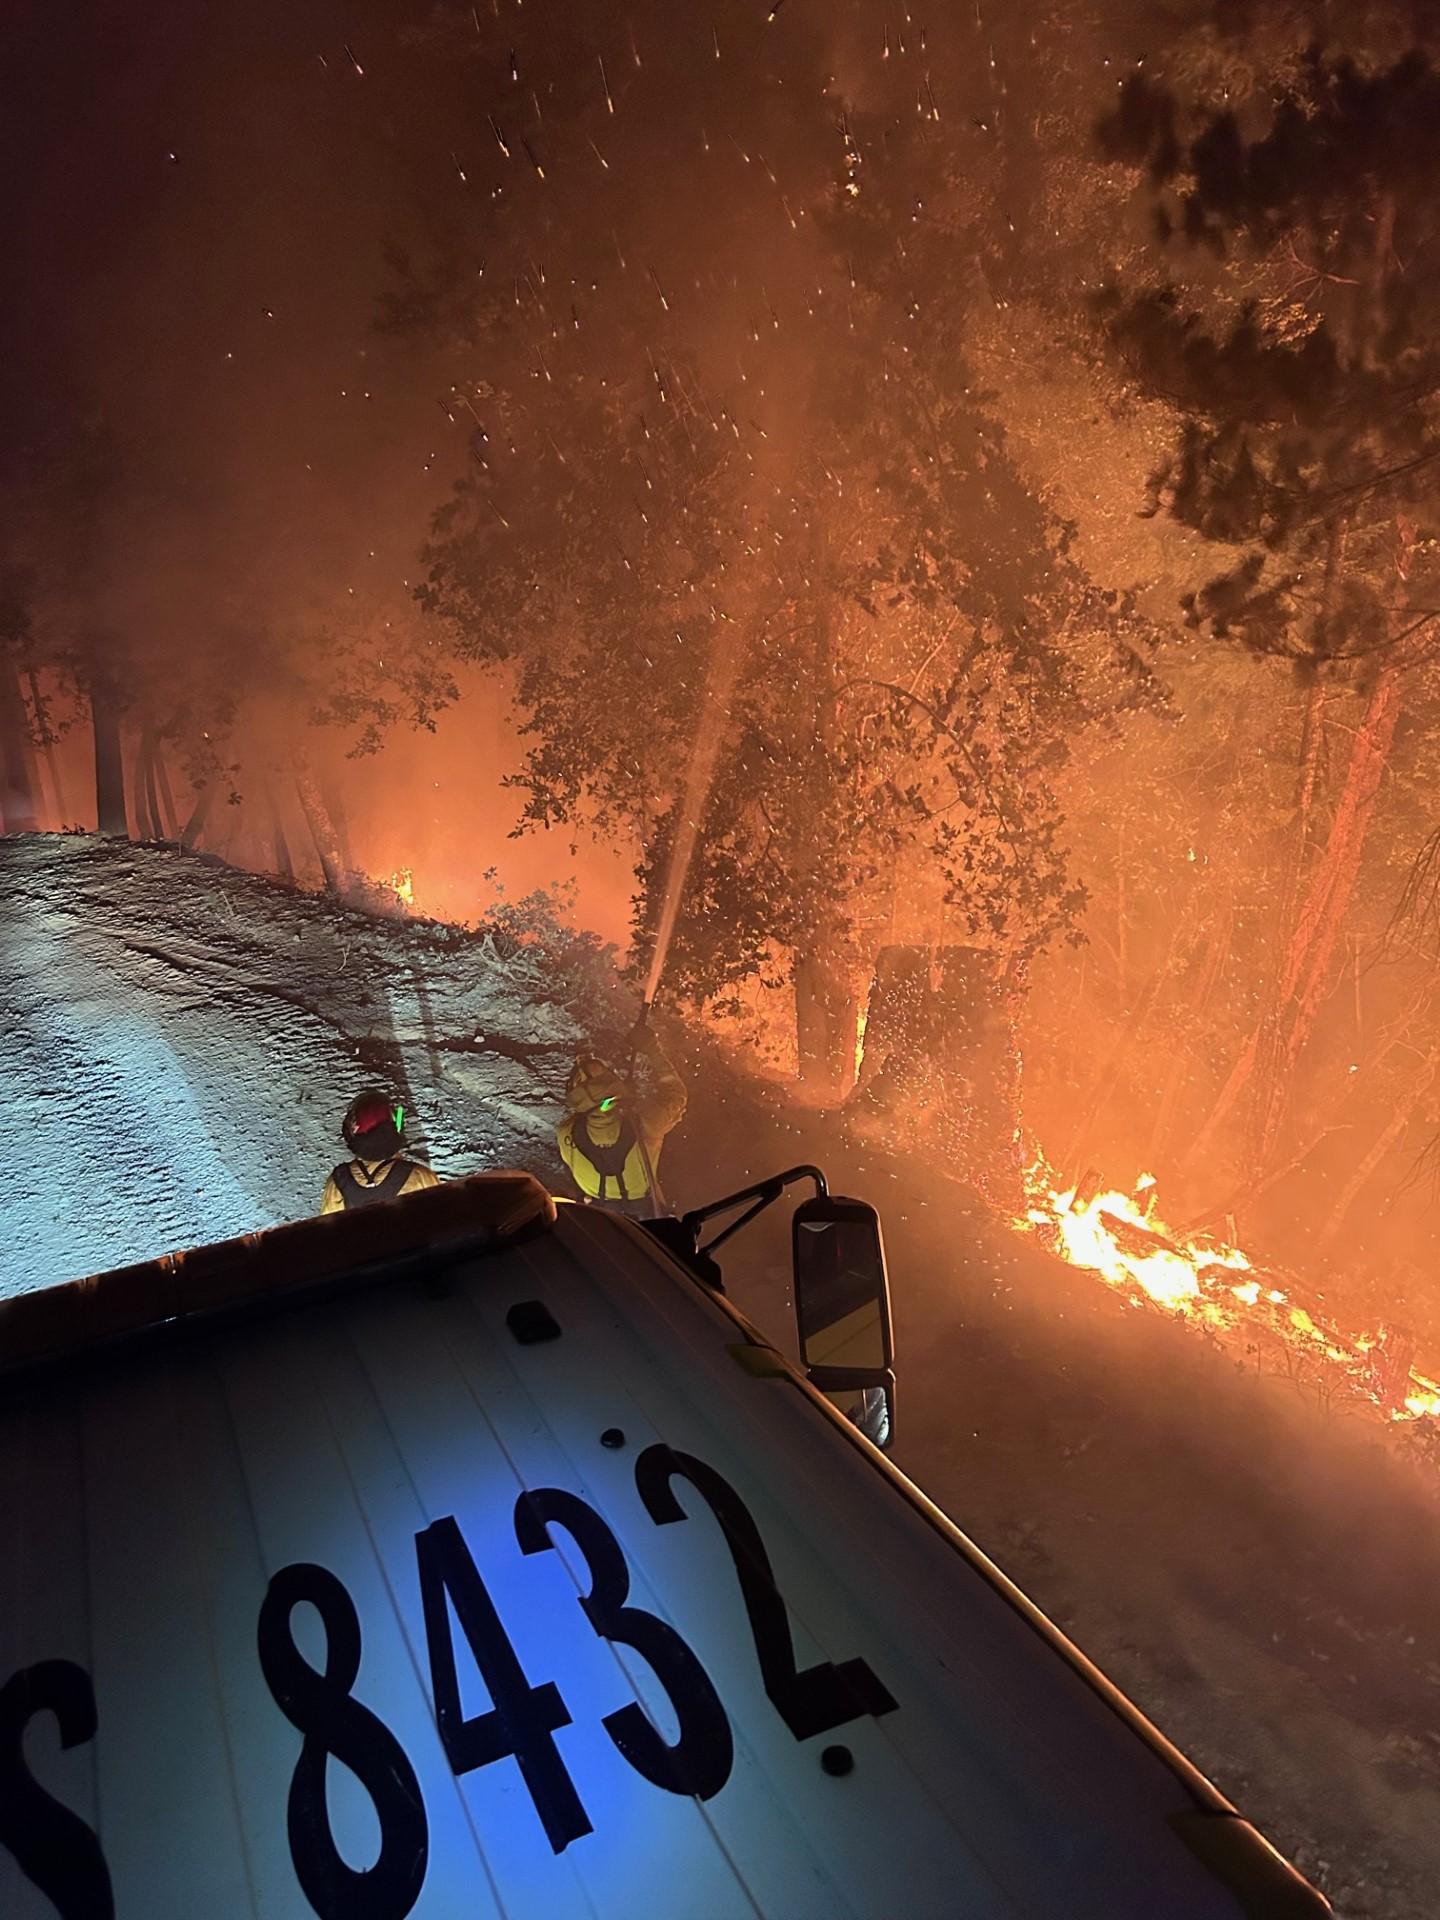 Image of firefighters using a hose from their engine to cool embers falling from burning trees, with fire burning across the ground below the road. Photo USDA Forest Service courtesy Tyson Widegren